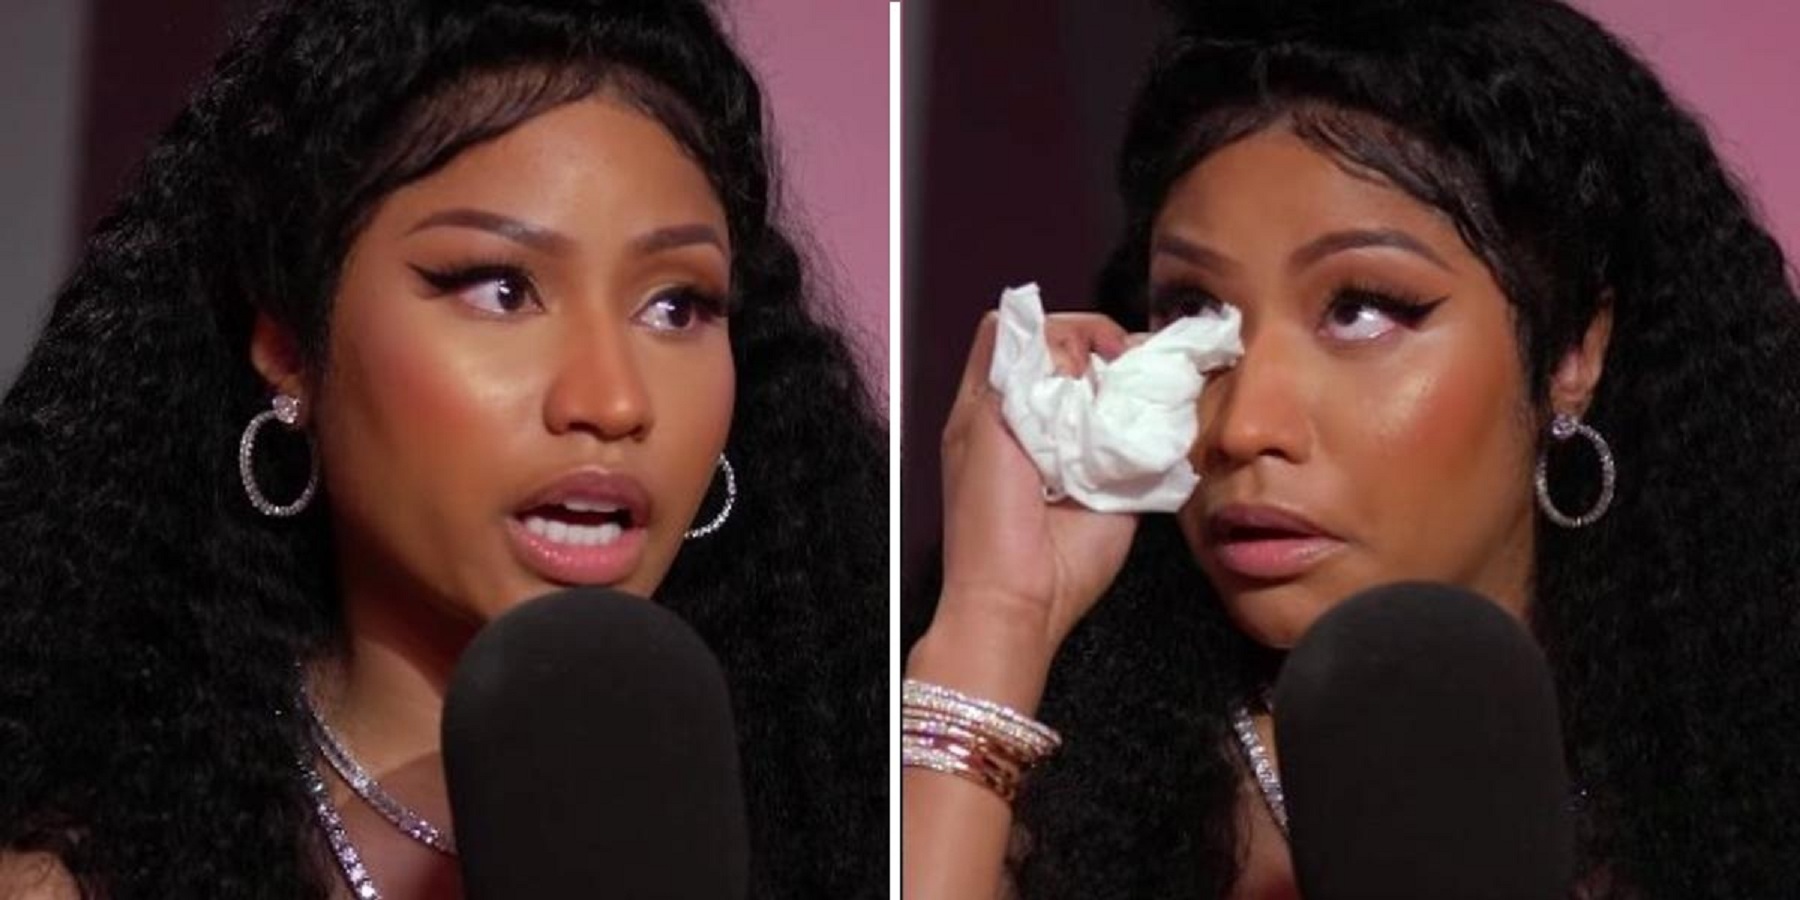 Trailer: Nicki Minaj’s Emotional ‘Queen Documentary’ Which Details an Abusive Past-Relationship!